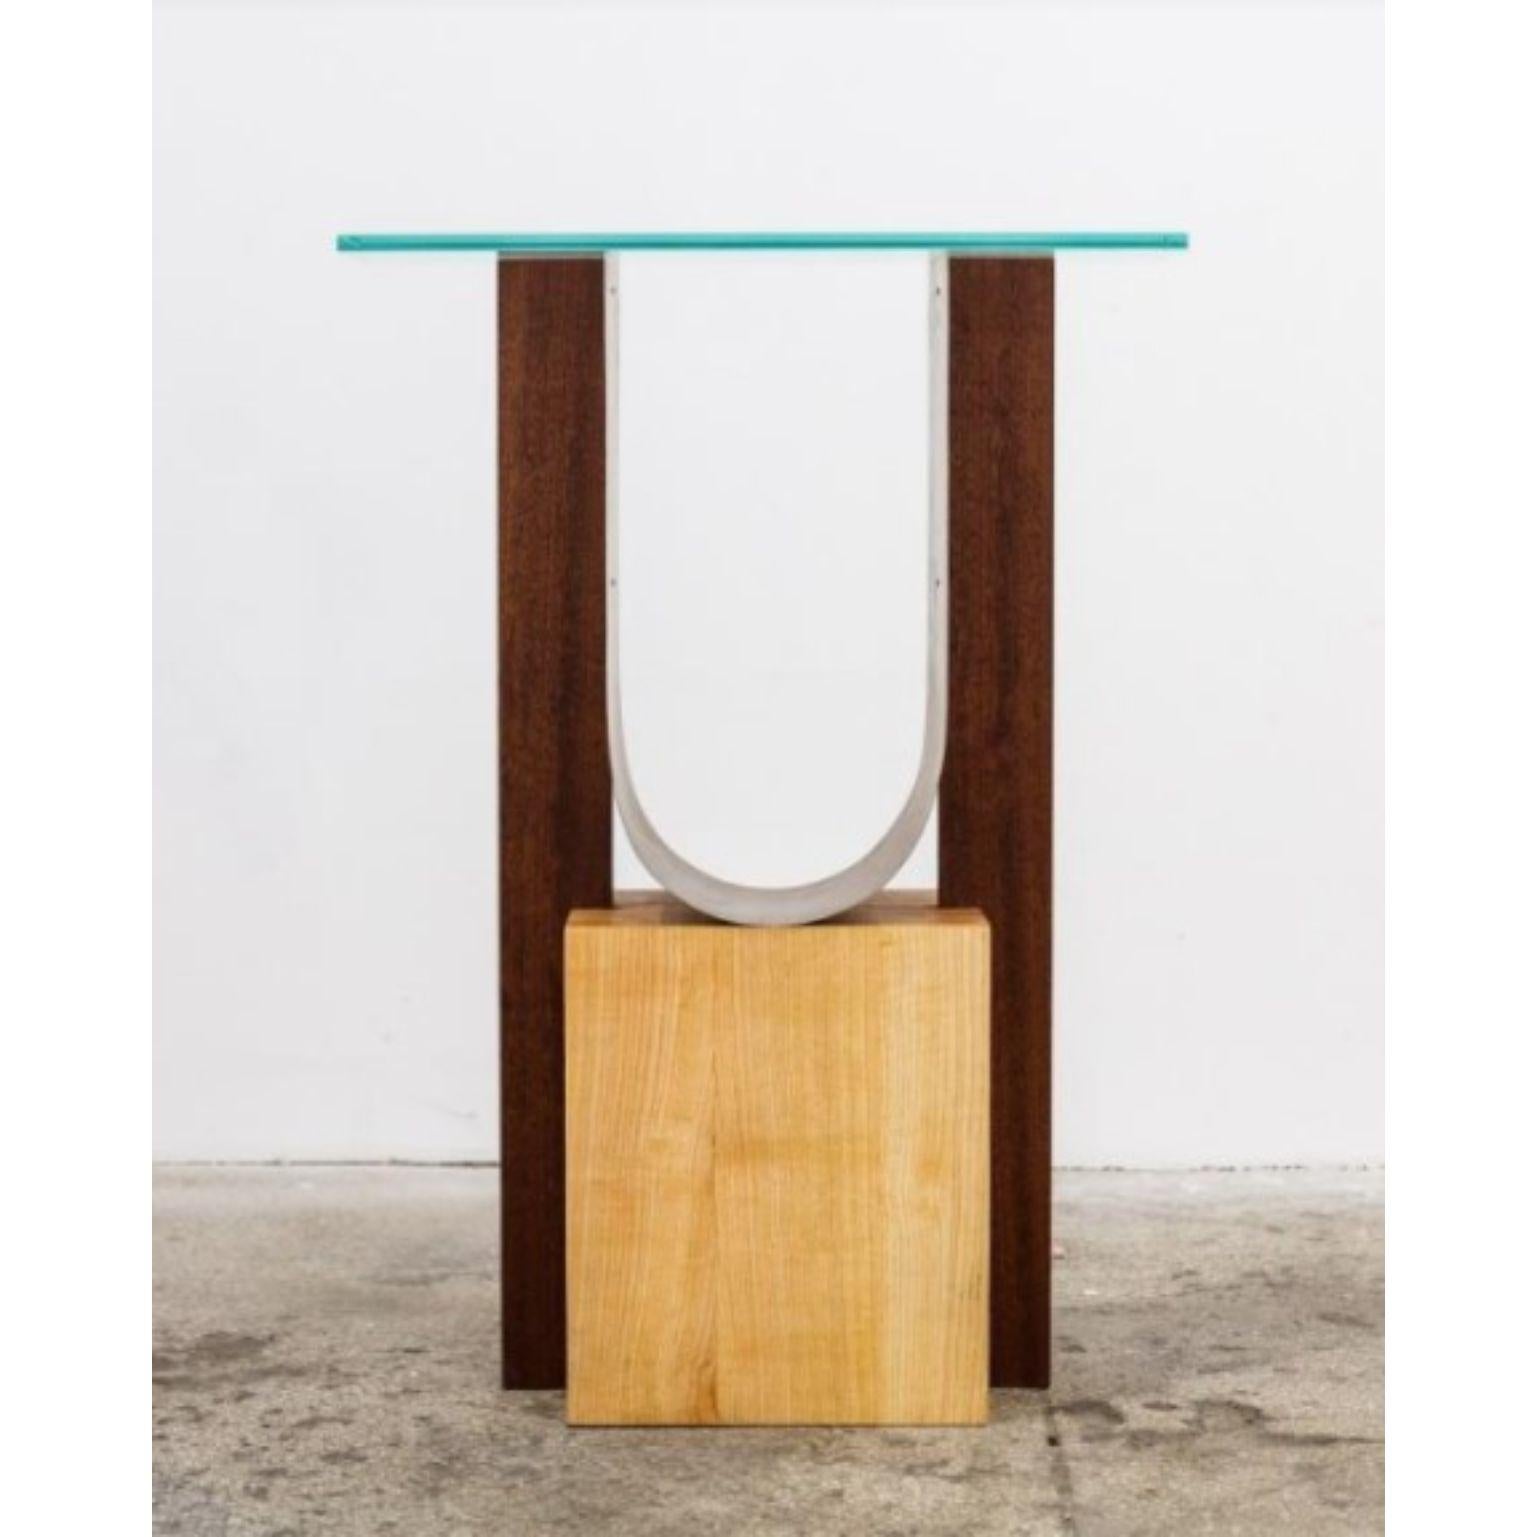 Form 3 by Radu Abraham
A limited series of 10, that is currently at nr.2
Materials: Lemn Frasin, Lemn Mahon, Tabla Otel, Sticla
Dimensions: 50 x 20 x 70 cm

Massive cube of ash wood, with mahogany sides, a thin sheet of bended steel, and a